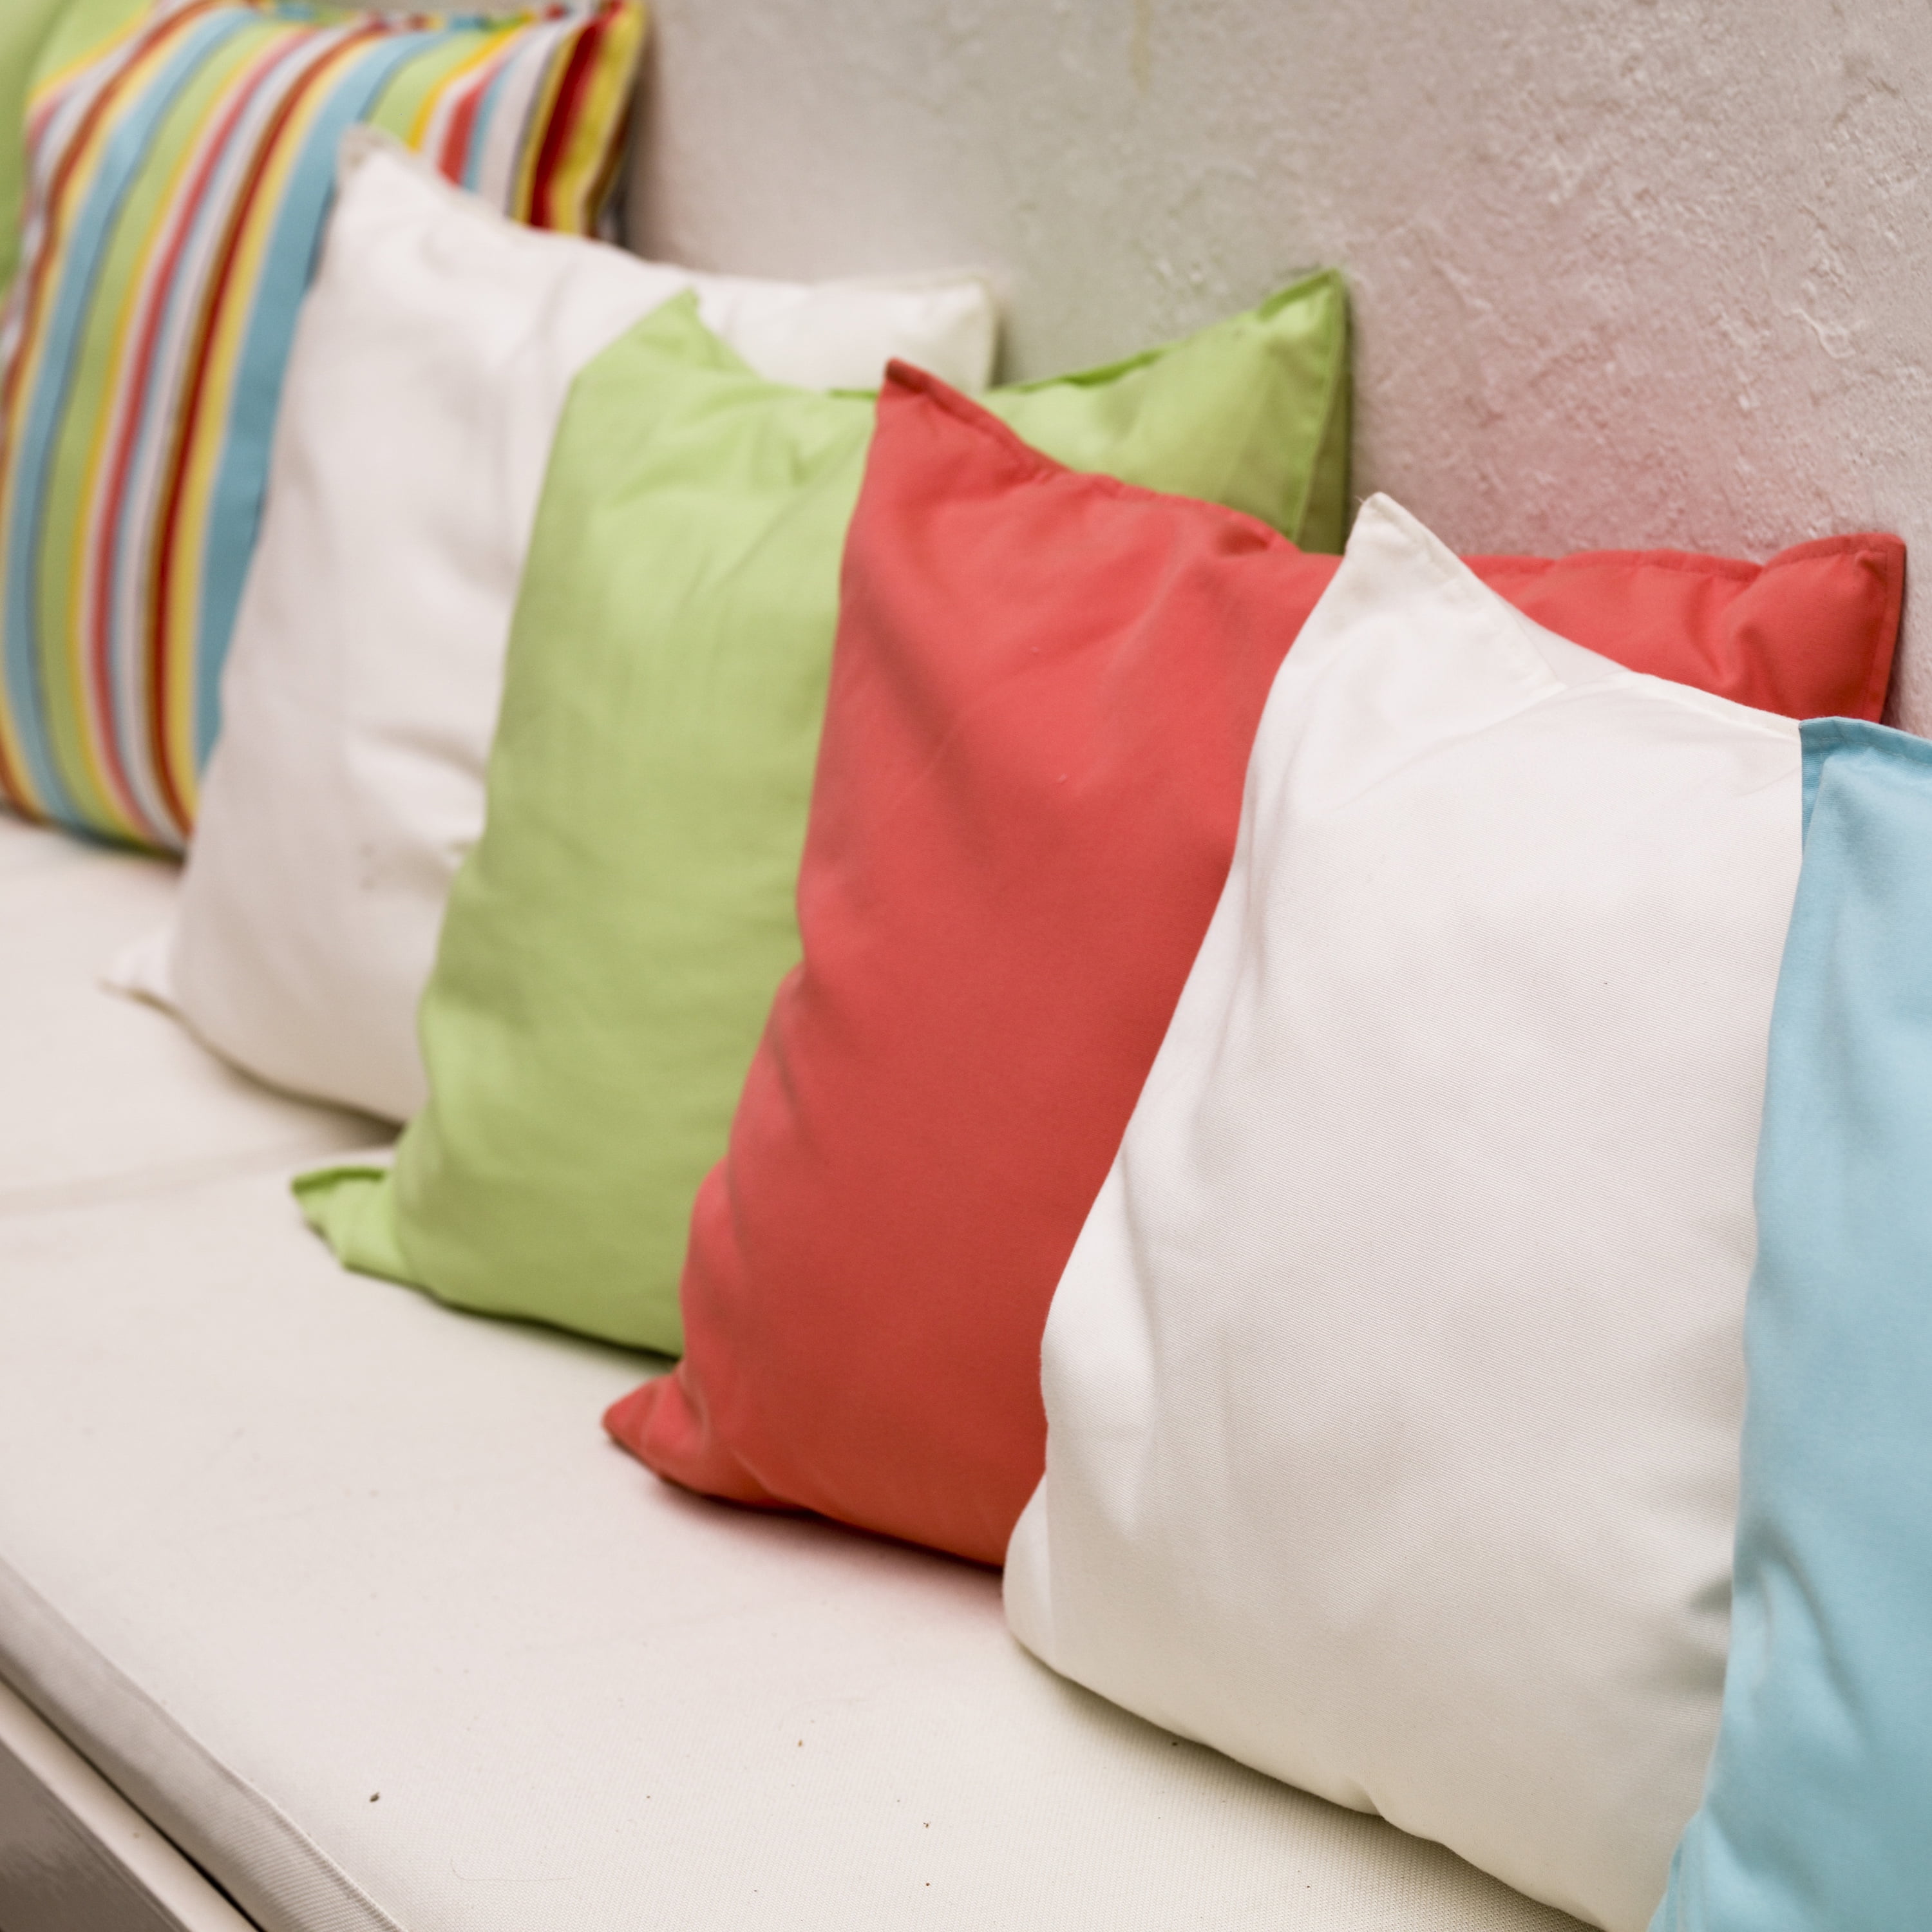 Feather-Fil® Pillow Insert by Fairfield™, 20 x 20 Square 